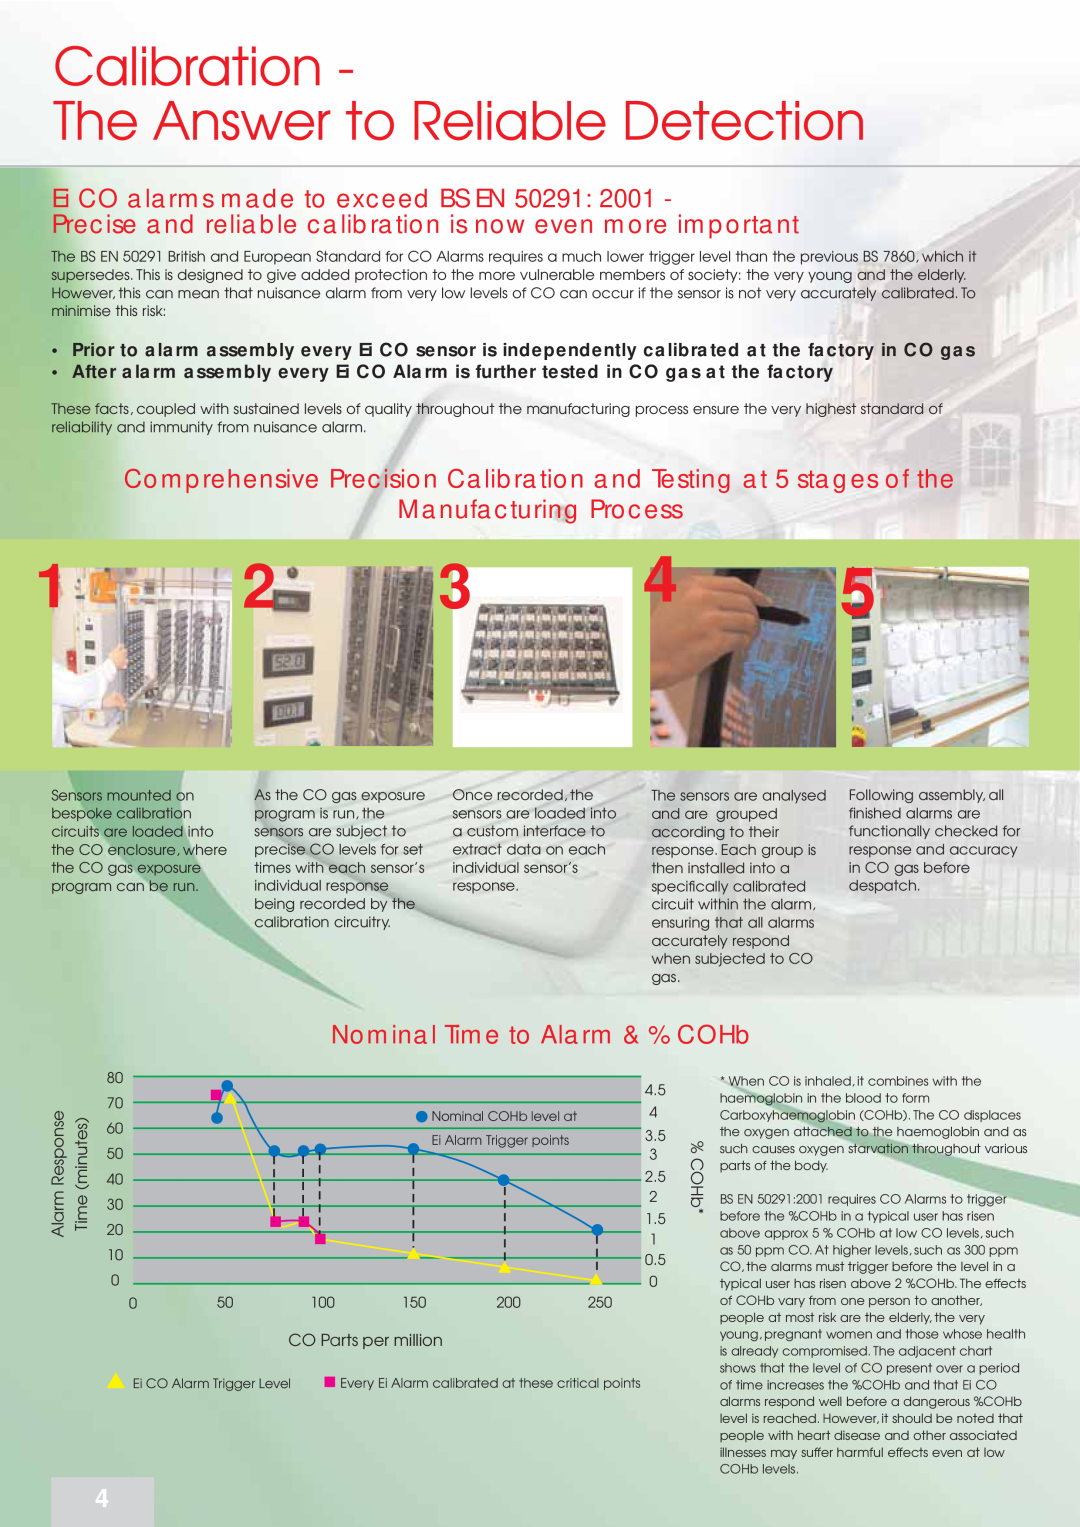 Aico 260 Series manual Calibration The Answer to Reliable Detection, 1 2 3 4, Ei CO alarms made to exceed BS EN 50291 